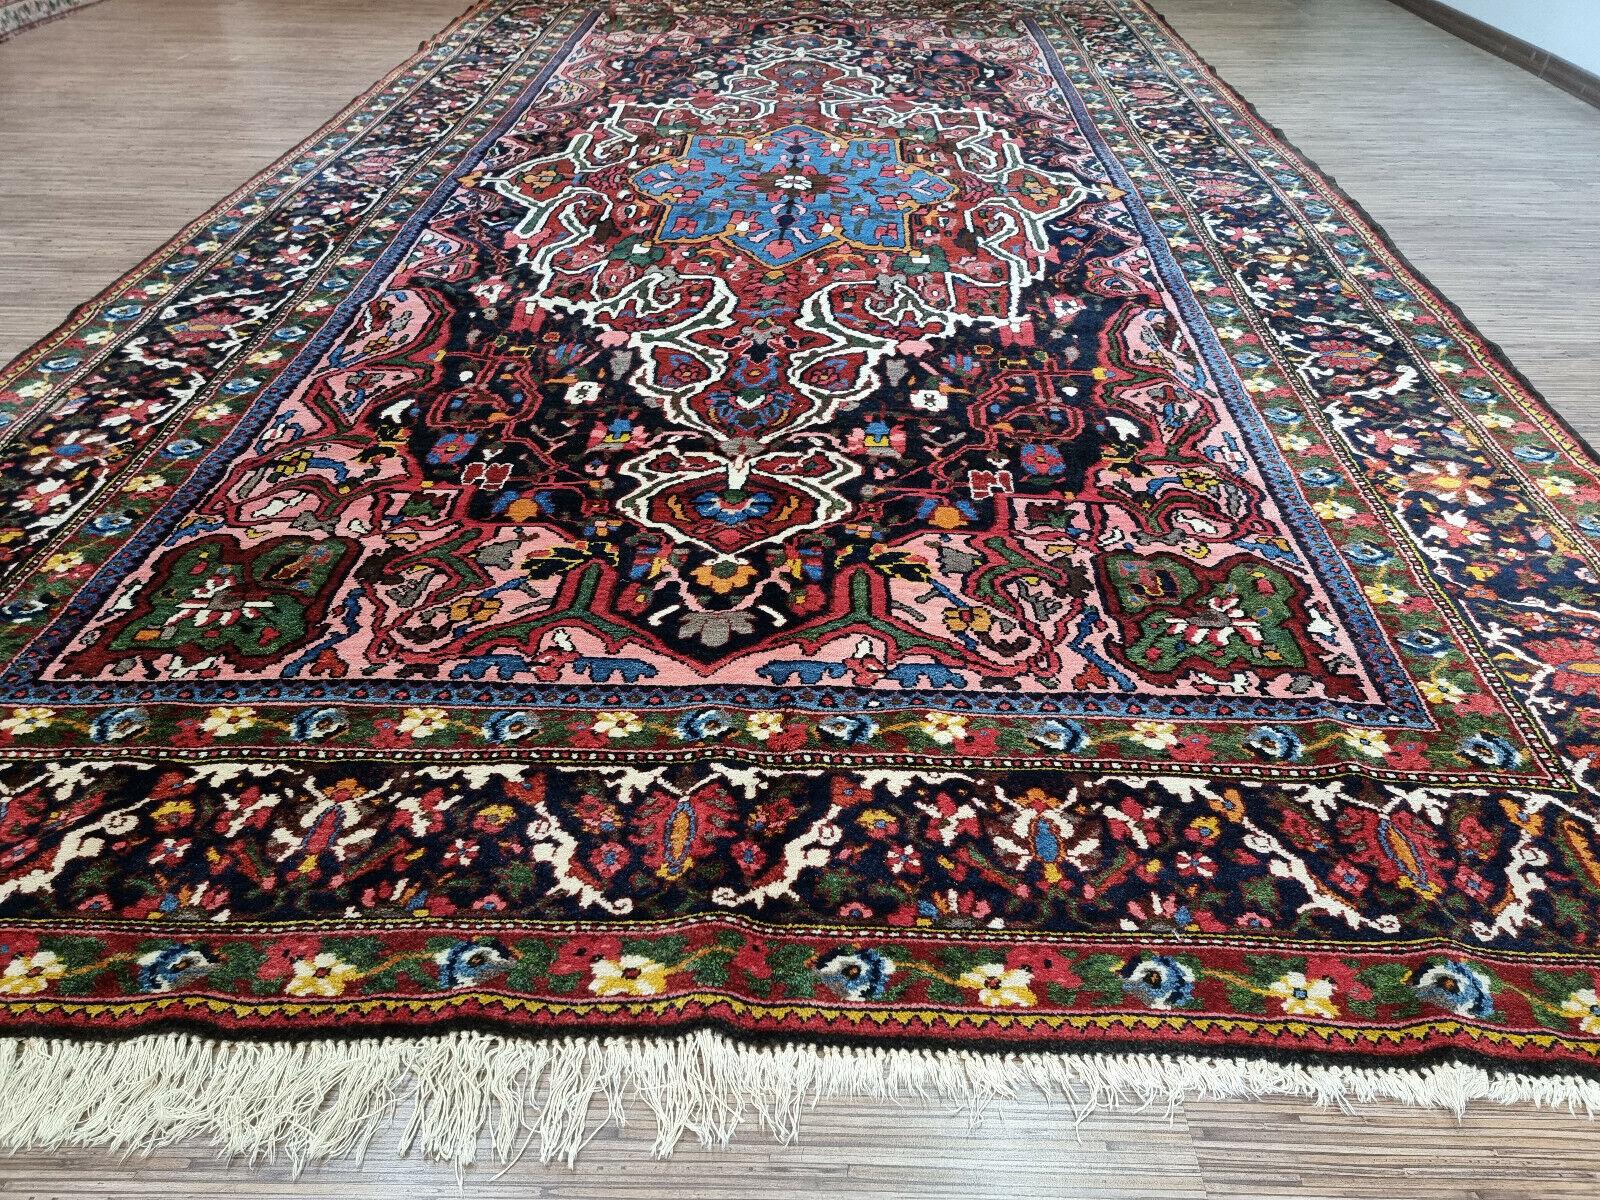 Hand-Knotted Handmade Antique Persian Style Bakhtiari Rug 7.2' x 13.2', 1920s - 1D74 For Sale